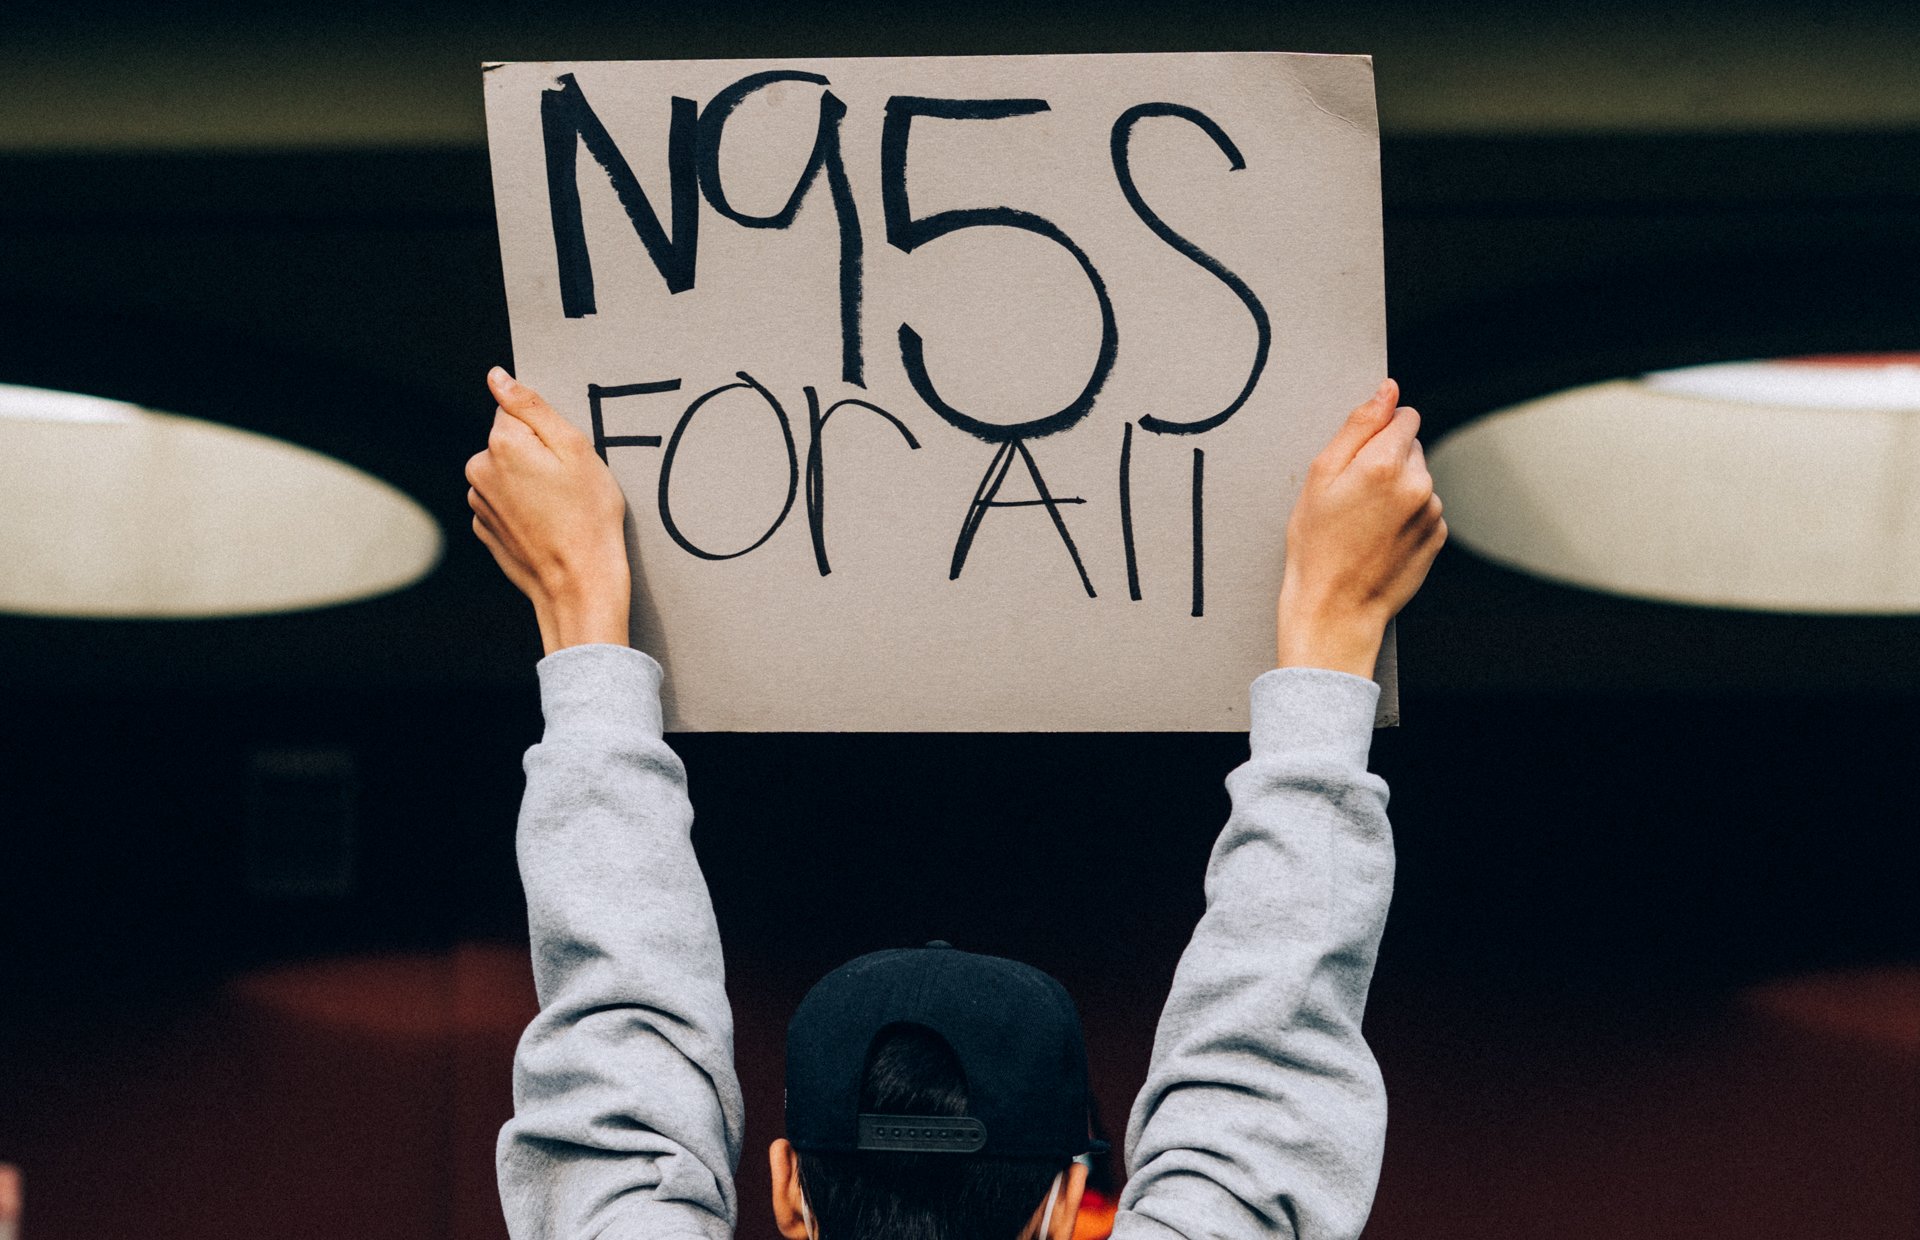  A teen from Seattle Public Schools holds a protest sign reading “N95s for all” during a student-led walkout that met at district headquarters to demand better Covid safety measures in public schools. January 15, 2022 in Seattle, Wash.  